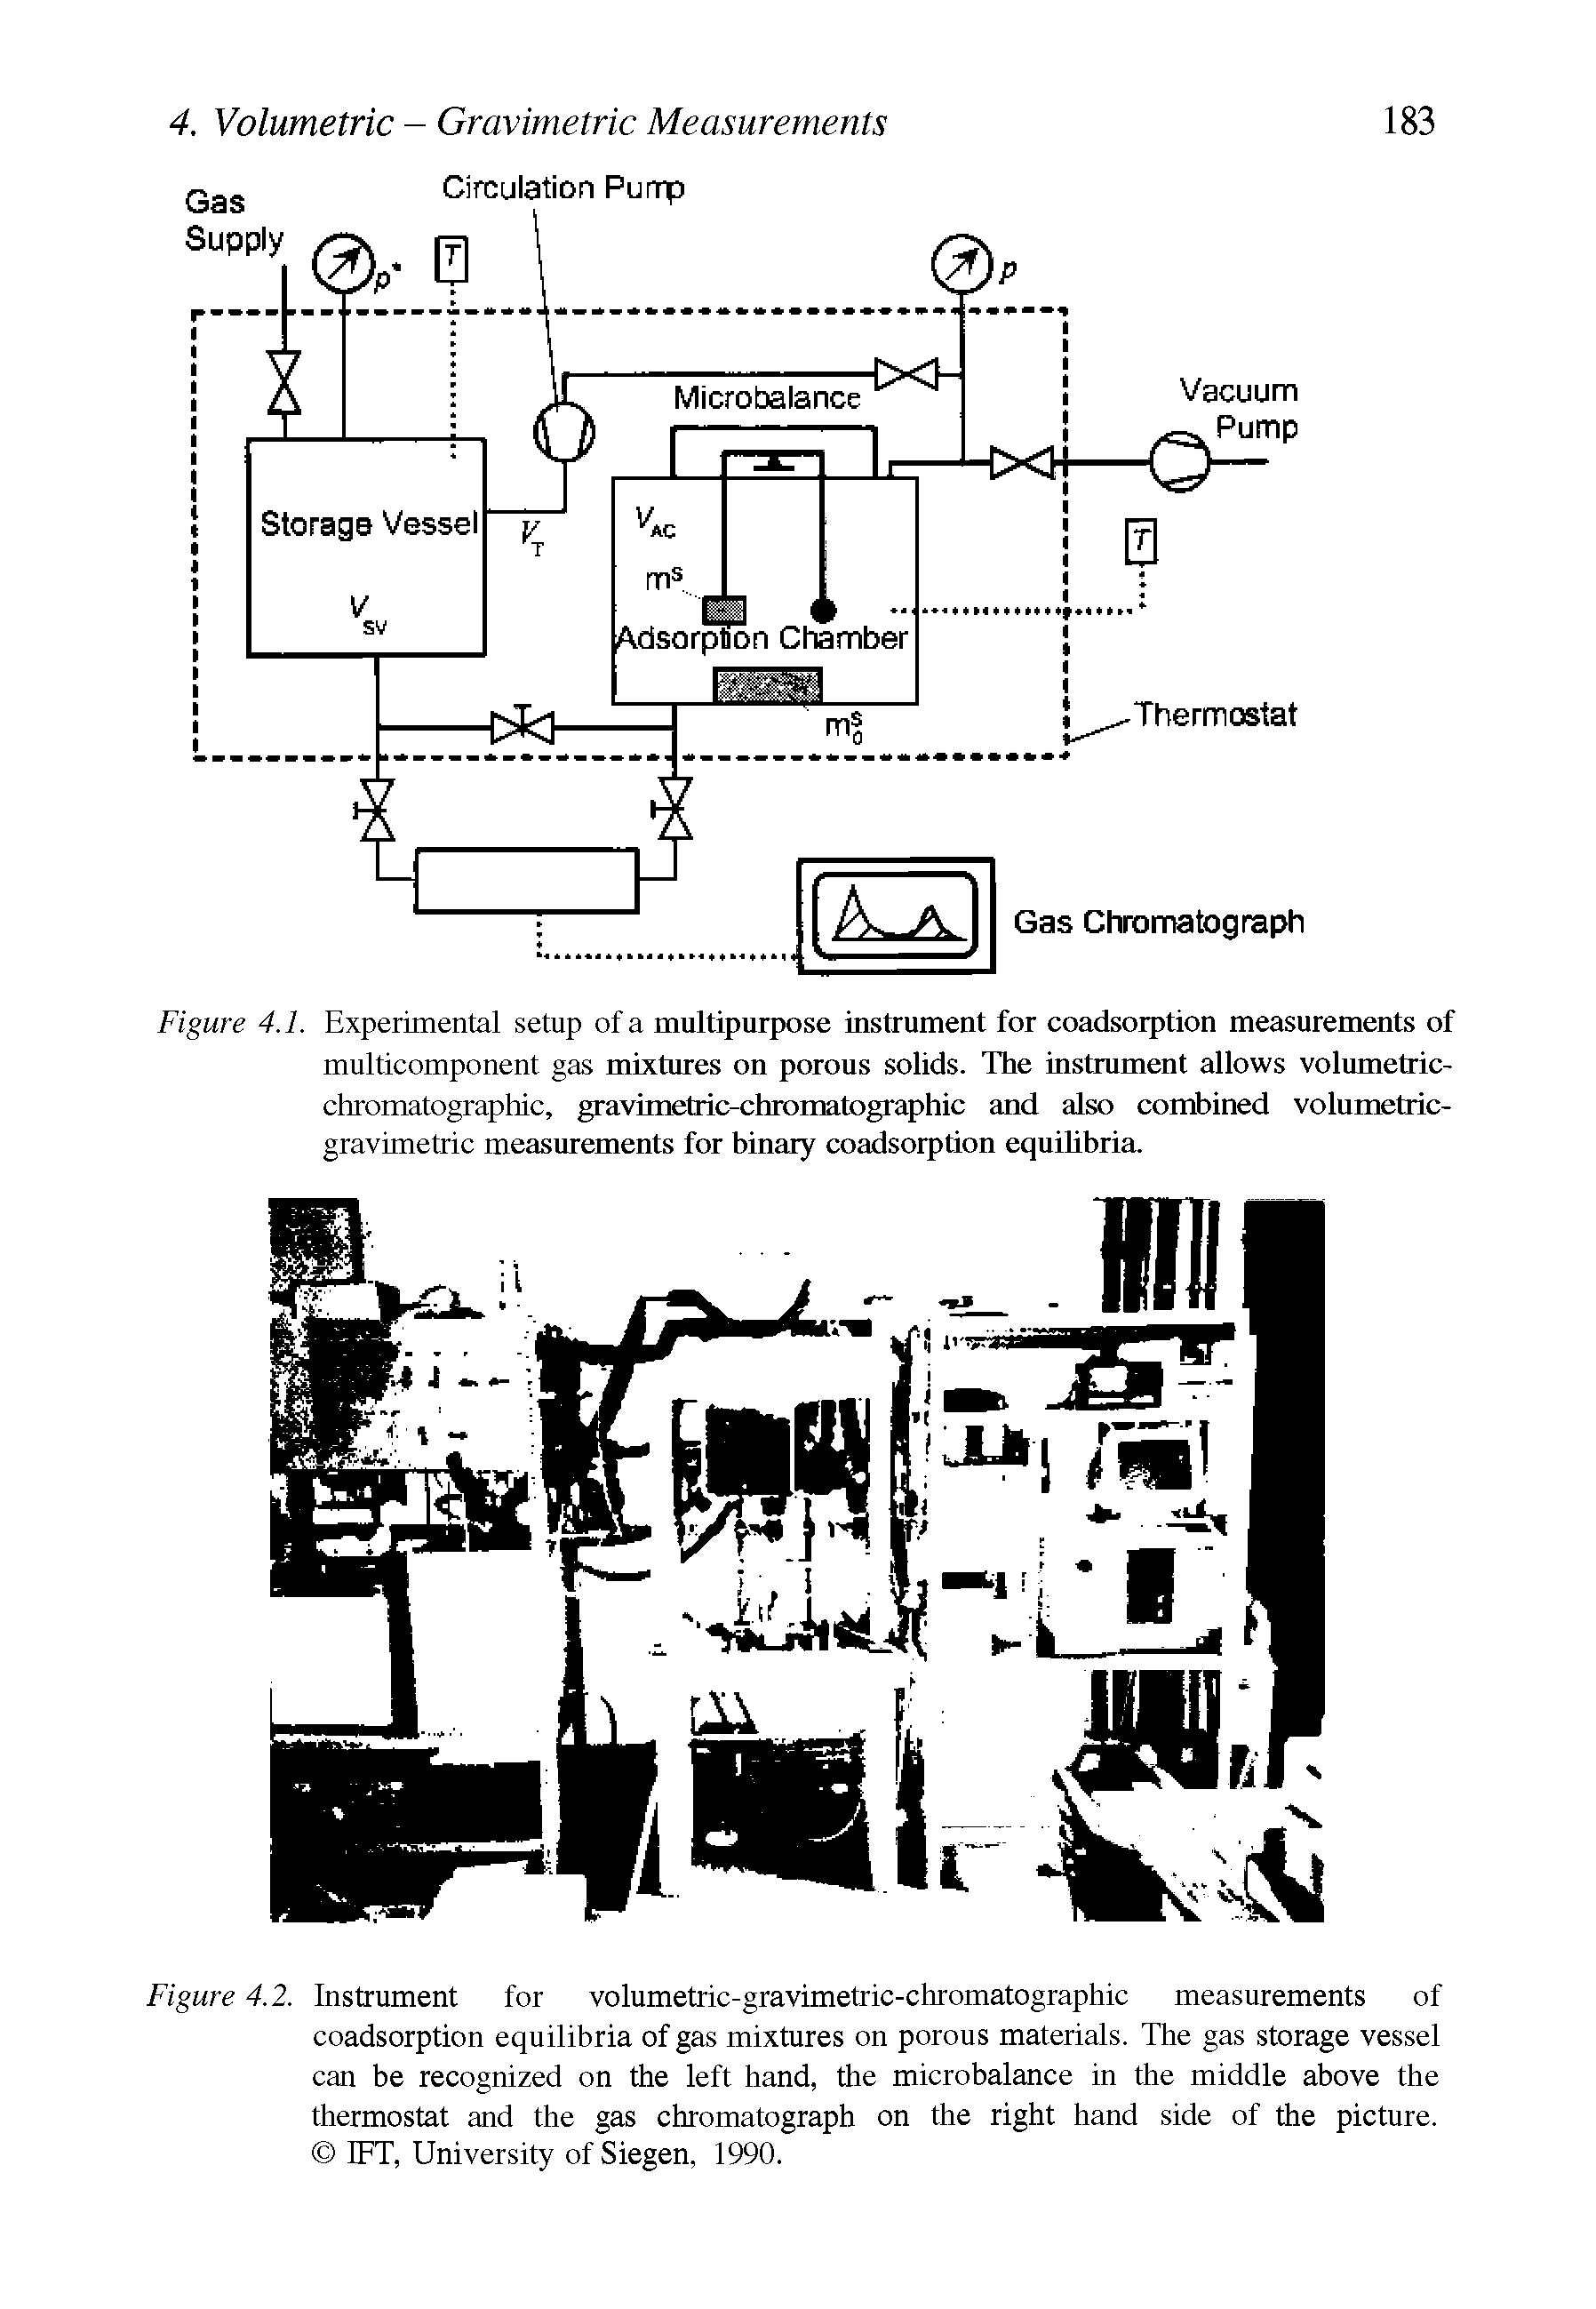 Figure 4.2. Instrument for volumetric-gravimetric-chromatographic measurements of coadsorption equilibria of gas mixtures on porous materials. The gas storage vessel can be recognized on the left hand, the microbalance in the middle above the thermostat and the gas chromatograph on the right hand side of the picture. IFT, University of Siegen, 1990.